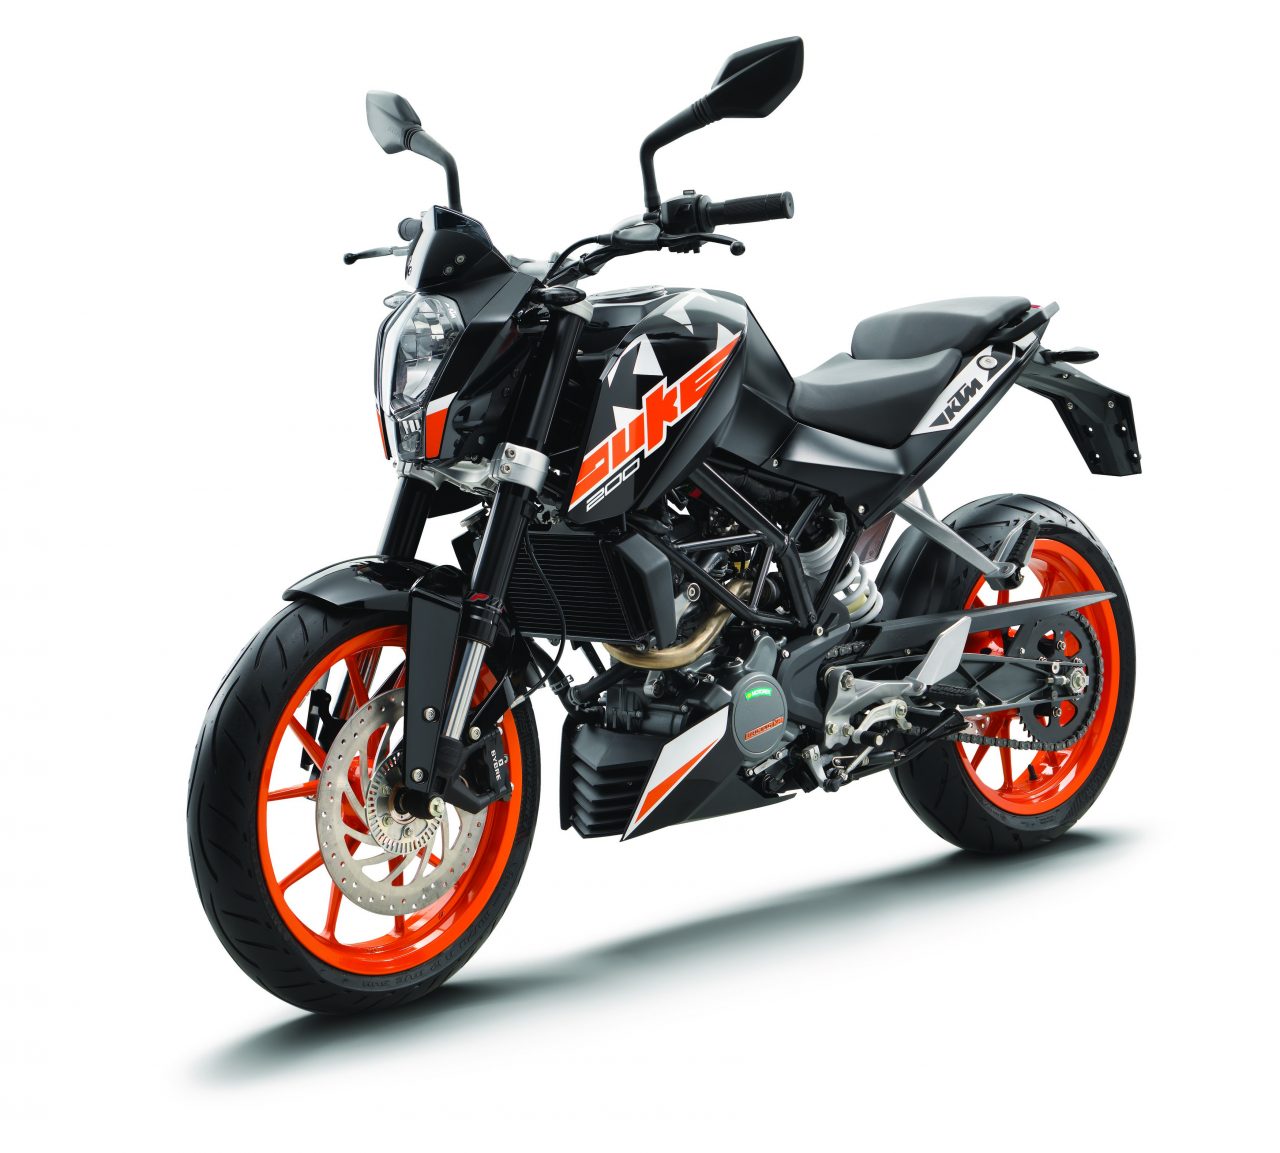 KTM 200 Duke ABS launched India